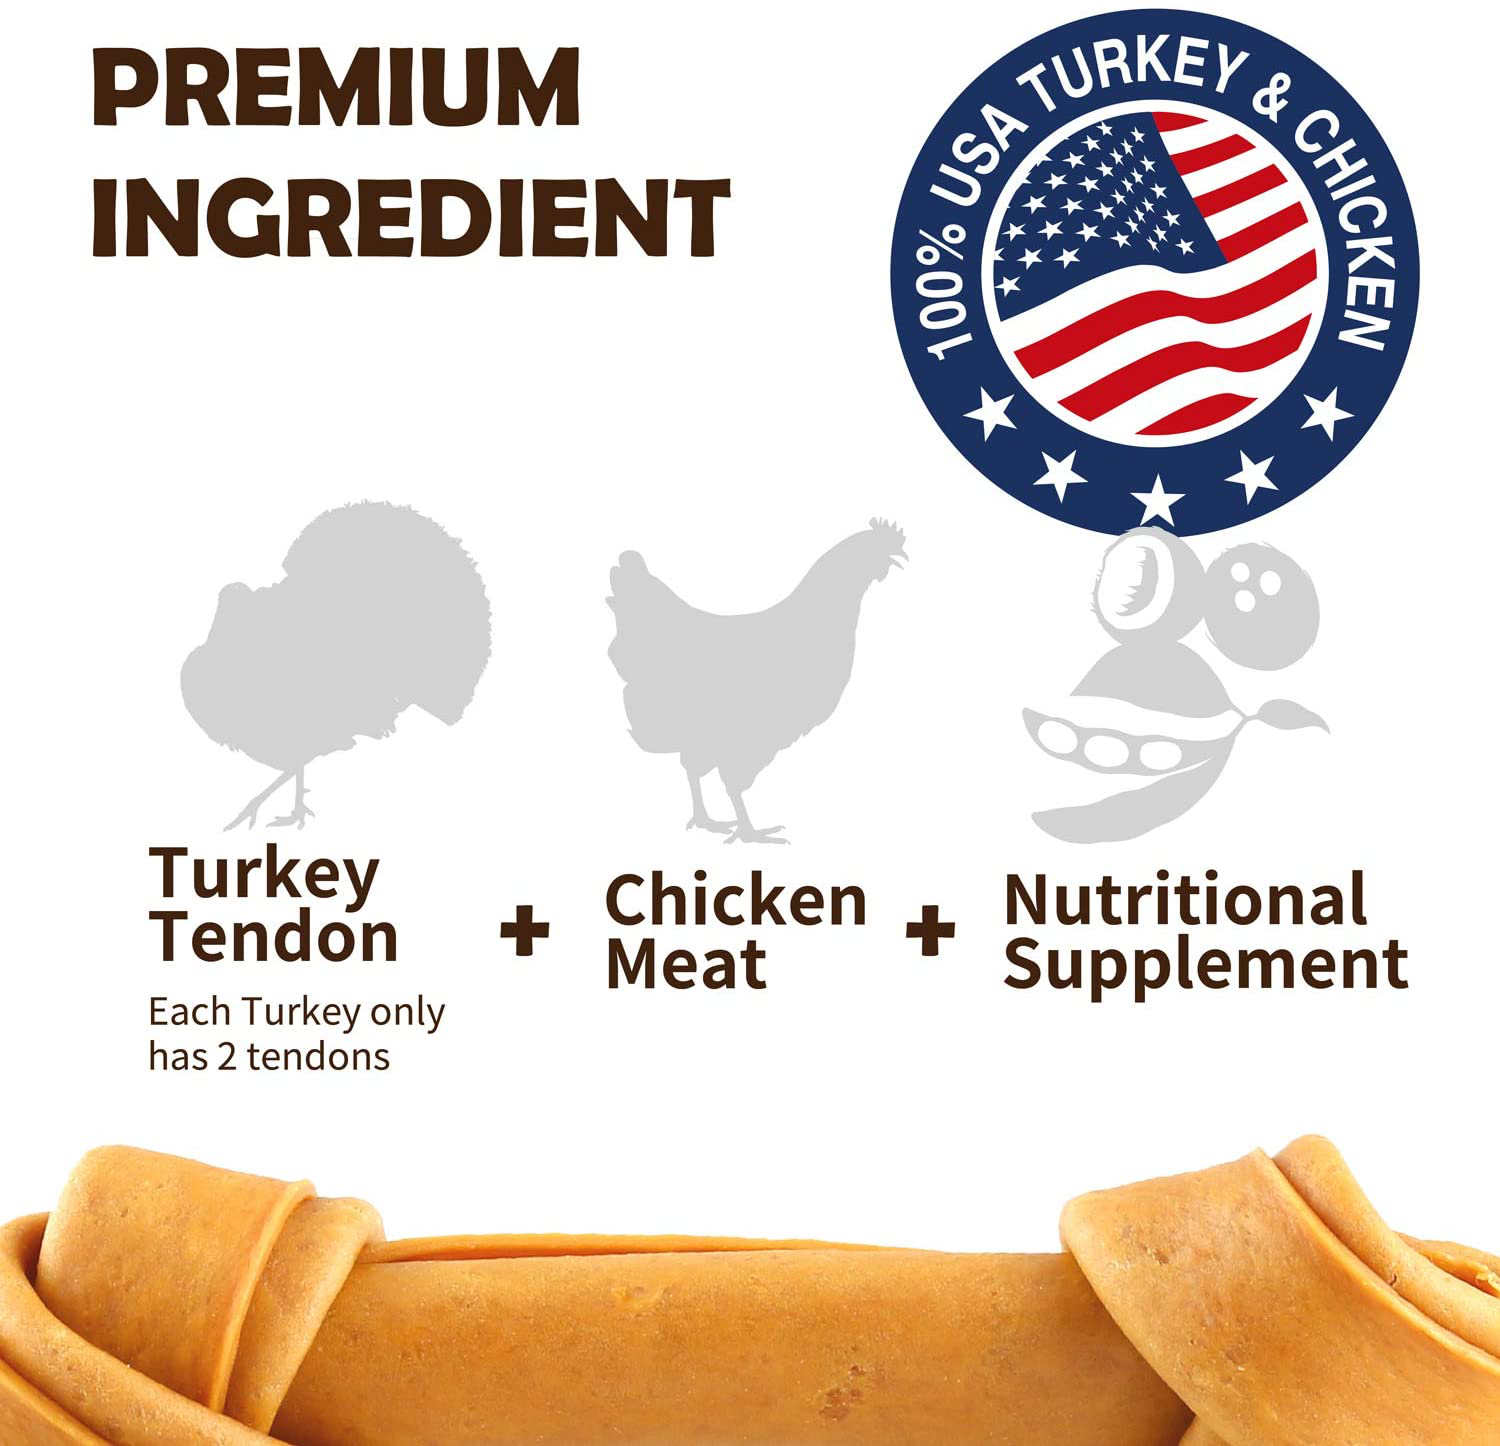 Afreschi Turkey Tendon for Dogs, Premium All-Natural, Hypoallergenic, Long-Lasting Dog Chew Treat, Easy to Digest, Alternative to Rawhide, Ingredient Sourced from Usa(Medium) Animals & Pet Supplies > Pet Supplies > Dog Supplies > Dog Treats A Freschi srl   